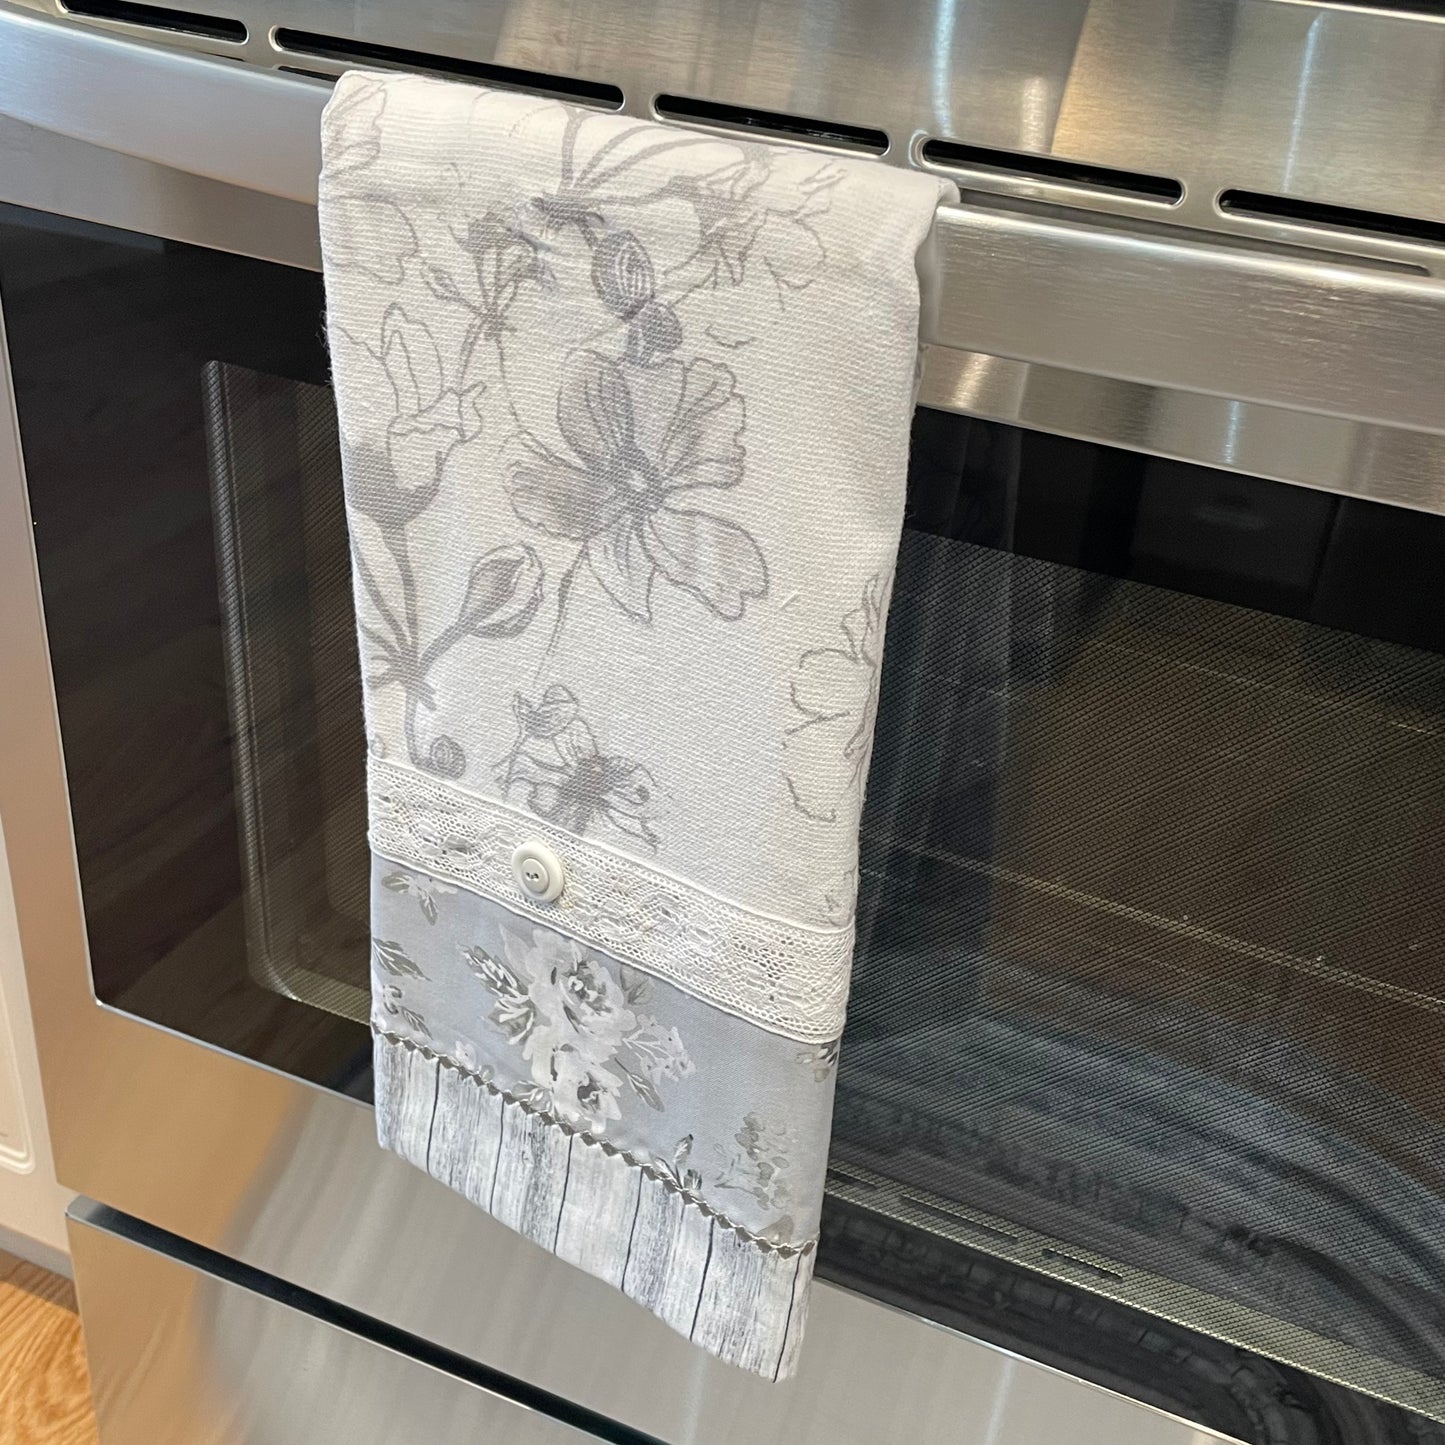 Grey and White Kitchen Dish Towel, Cute Handcrafted Modern Farmhouse Tea Towel - Home Stitchery Decor